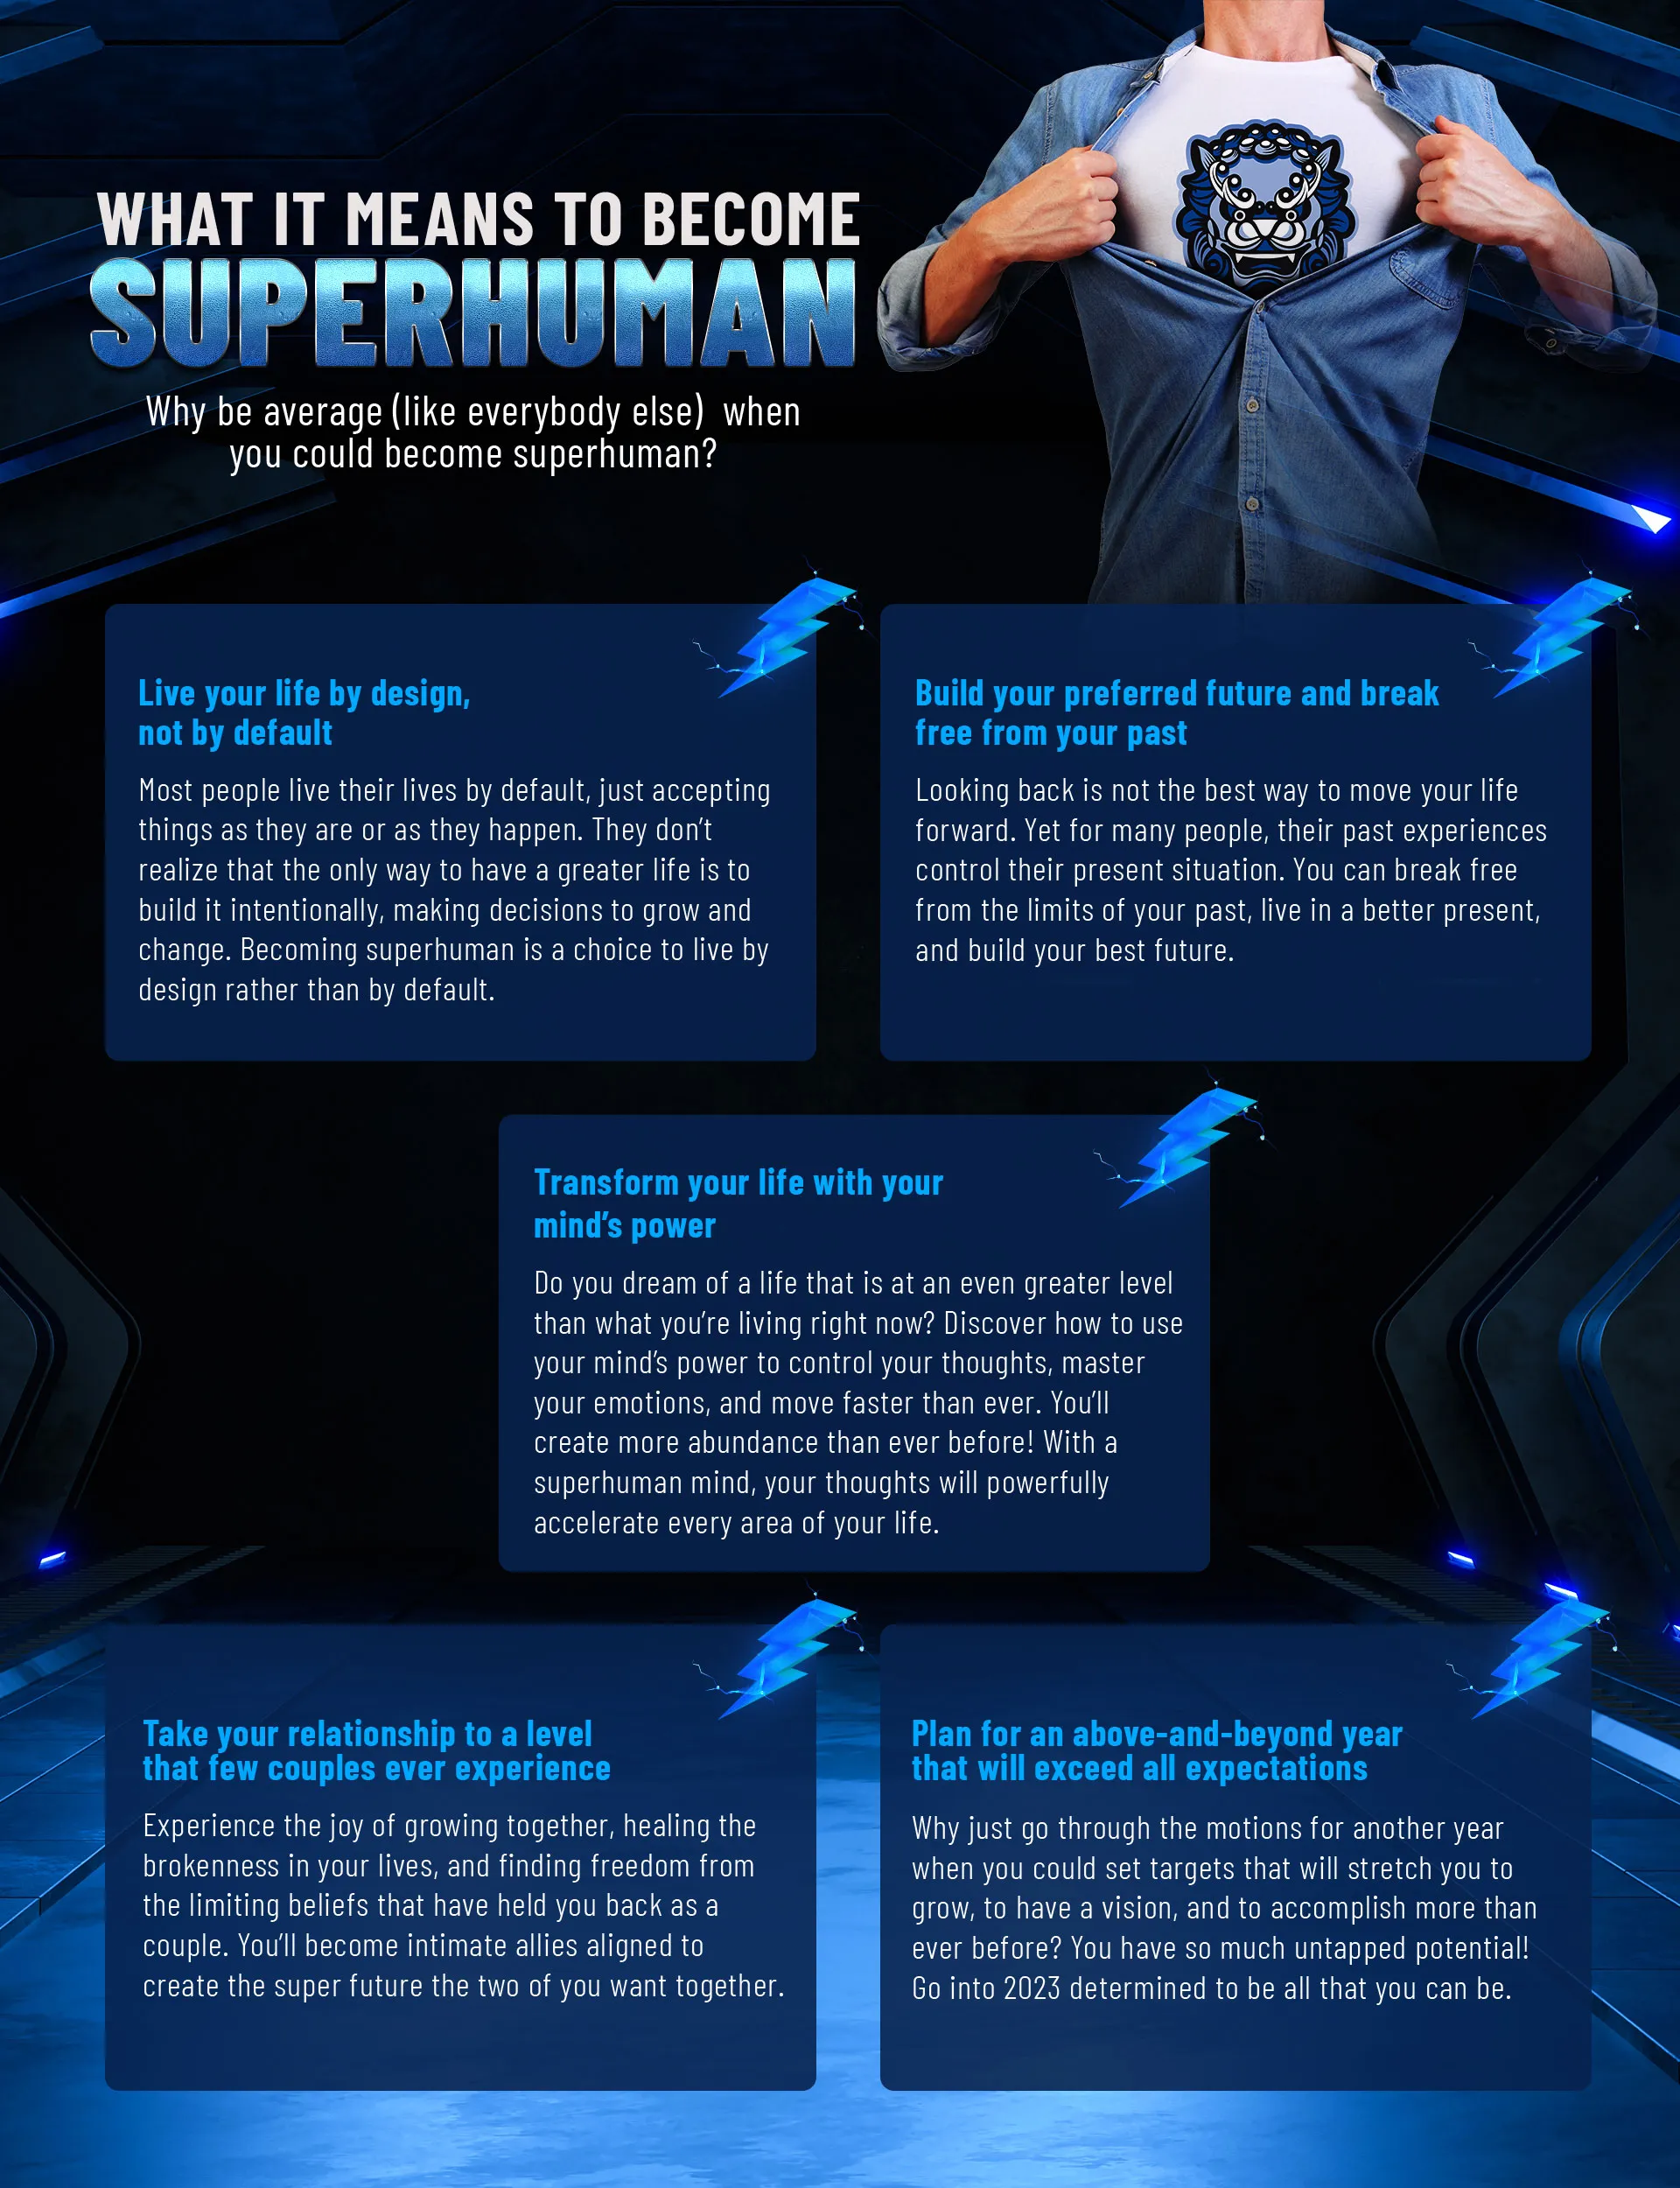 What it means to become superhuman